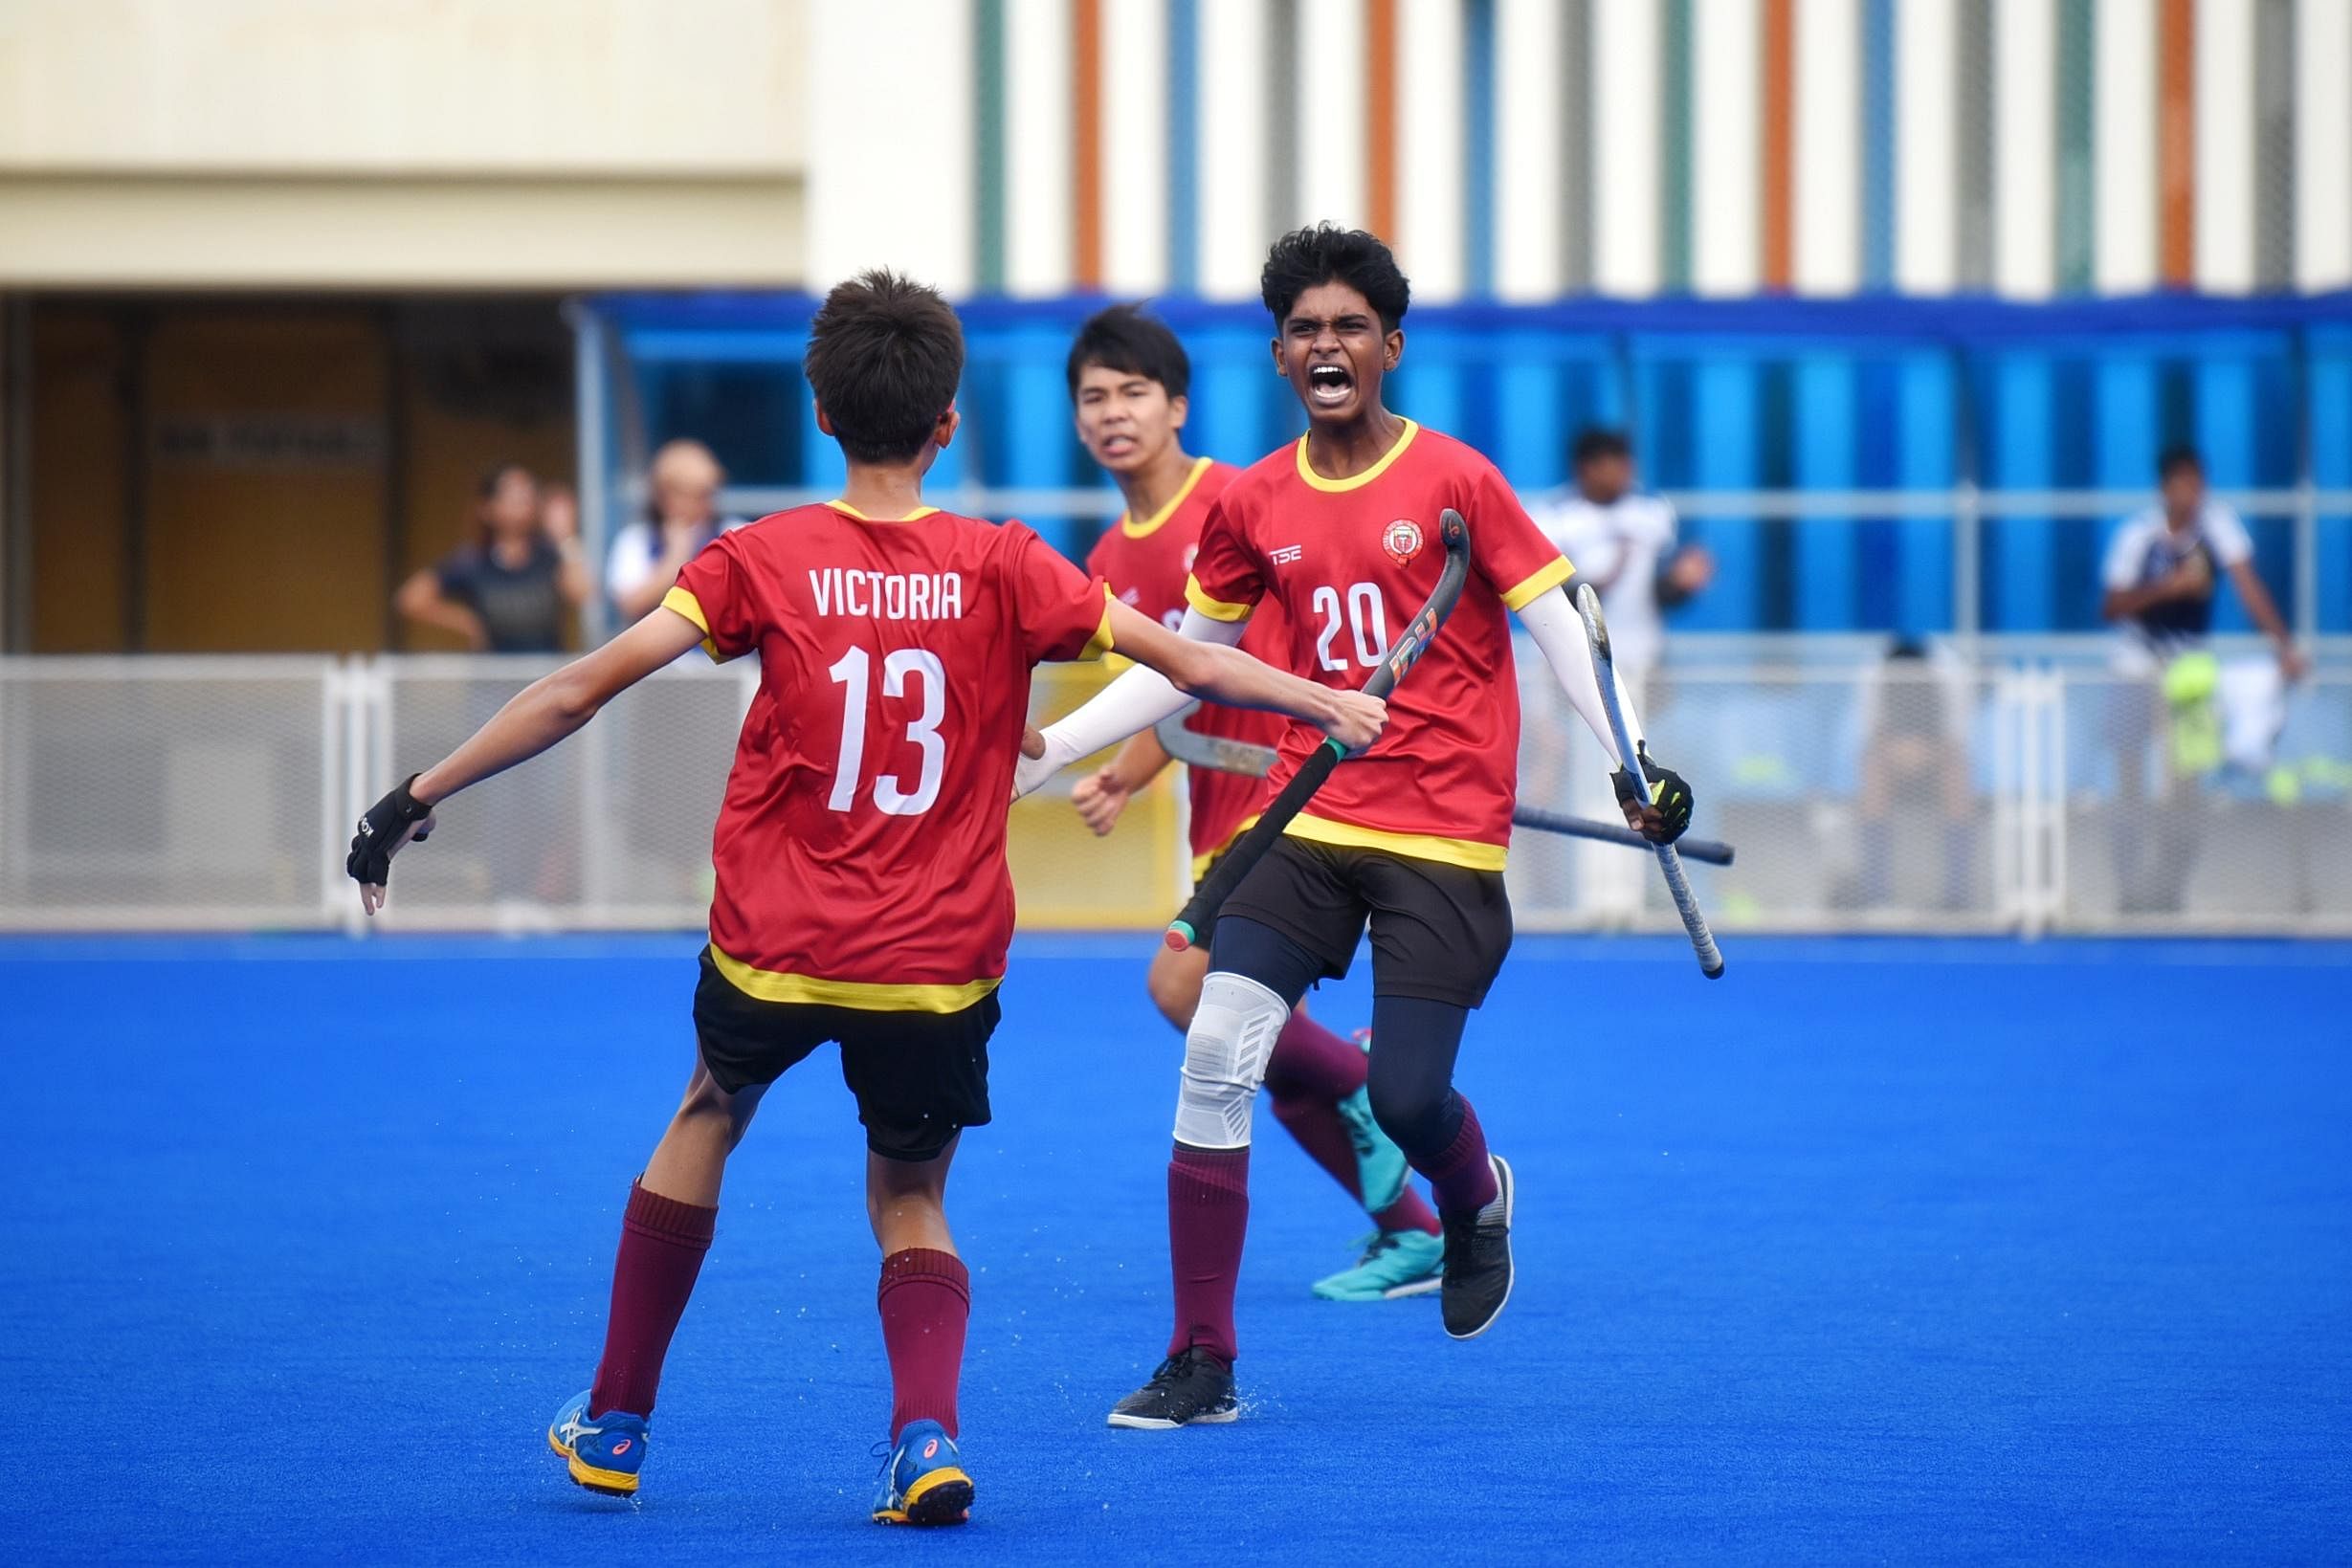 Victoria School hockey player gets the last laugh in B Division hockey final win over St Andrew’s